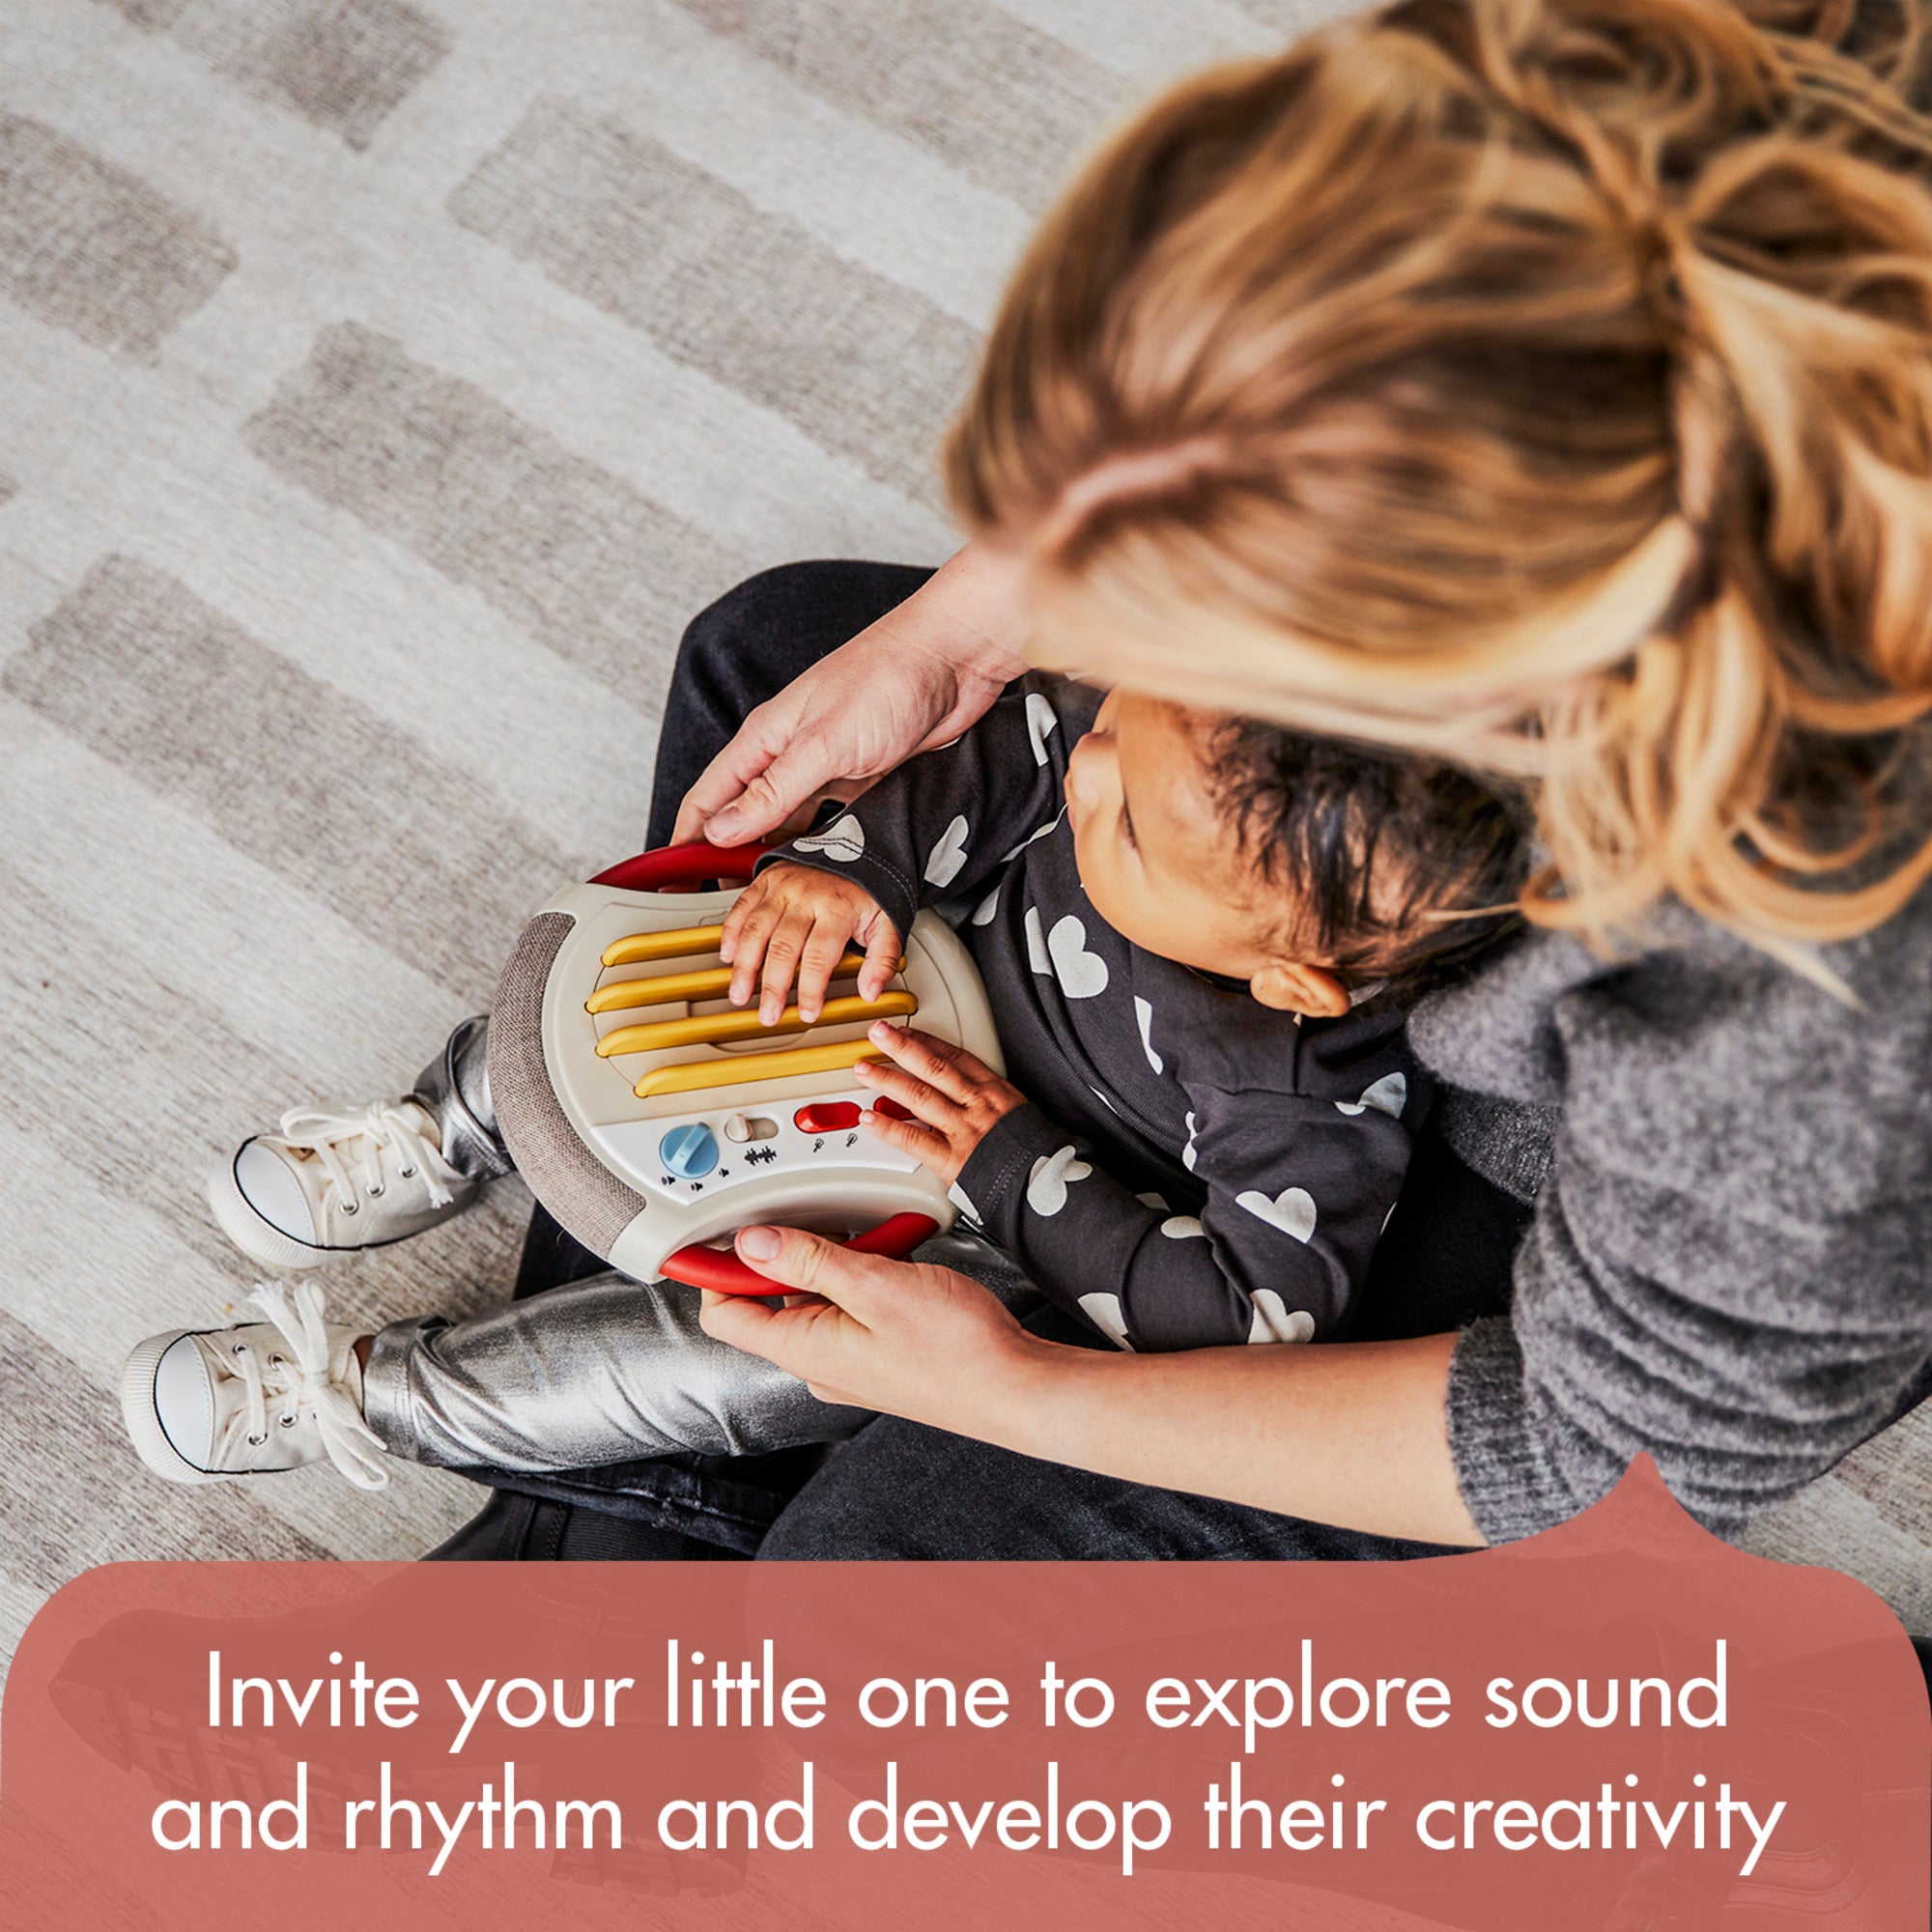 Tiny Rockers Guitar - Invite your little one to explore sound and rhythm and develop their creativity